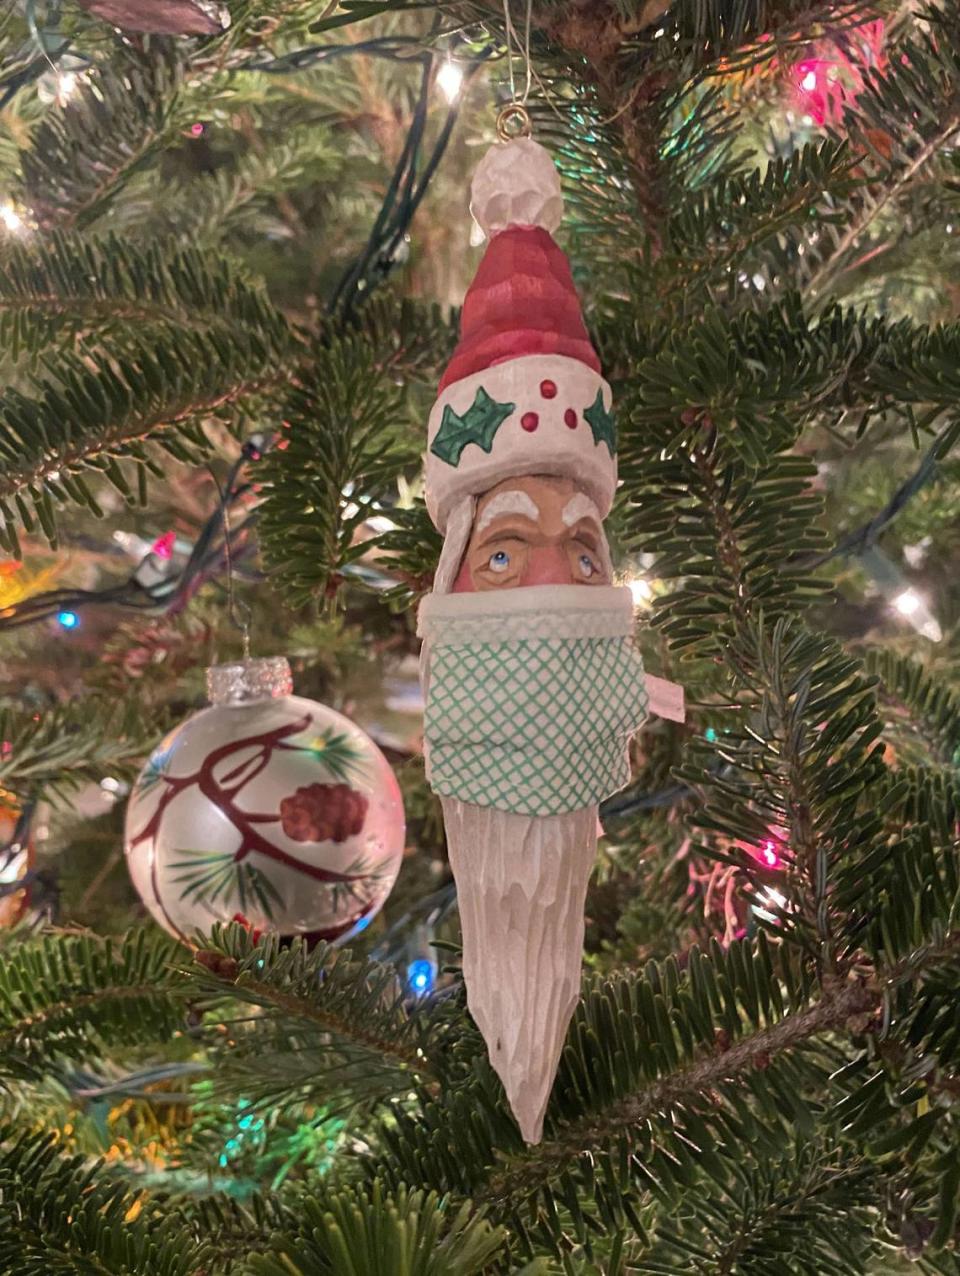 Jason McDaniel made this ornament in 2020, when Santa was taking precautions to avoid getting COVID-19. McDaniel tries to make a new ornament every year.